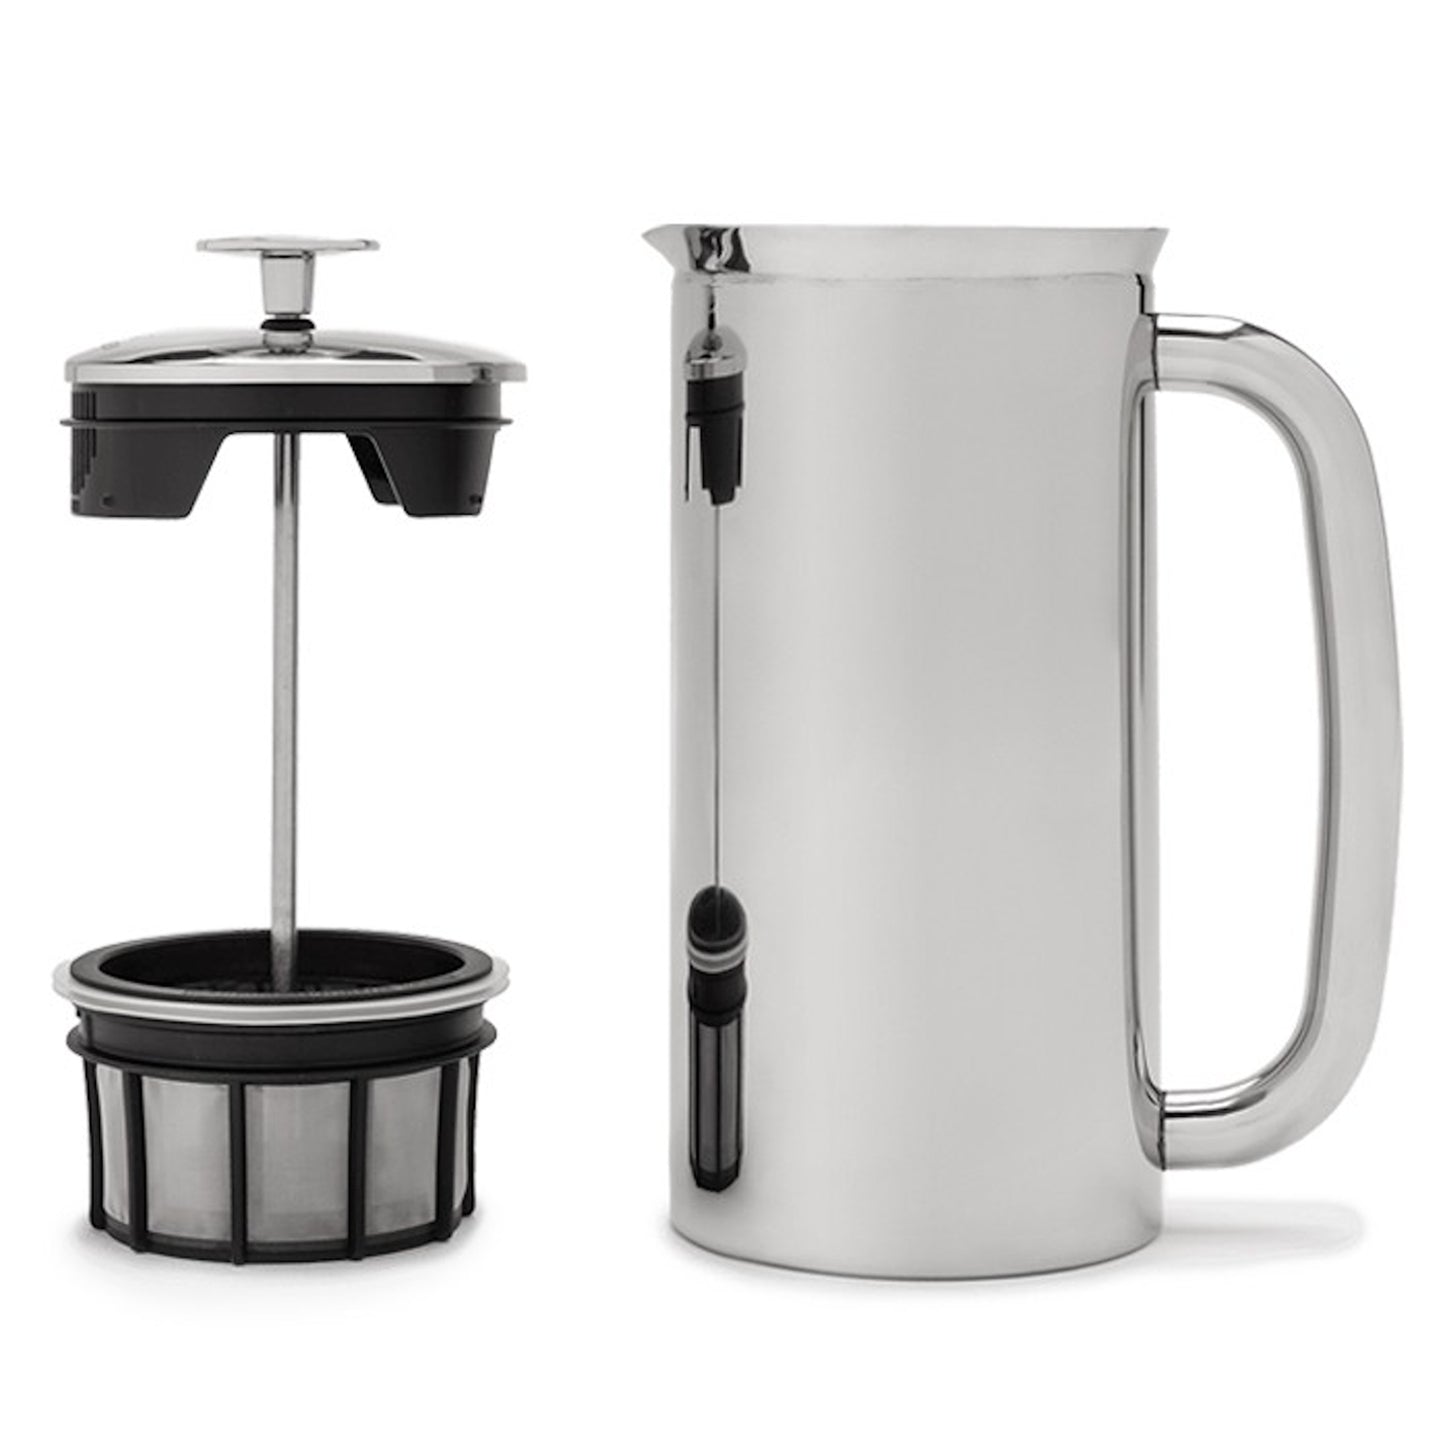 Espro P7 Cafetiere / Polished Stainless Steel